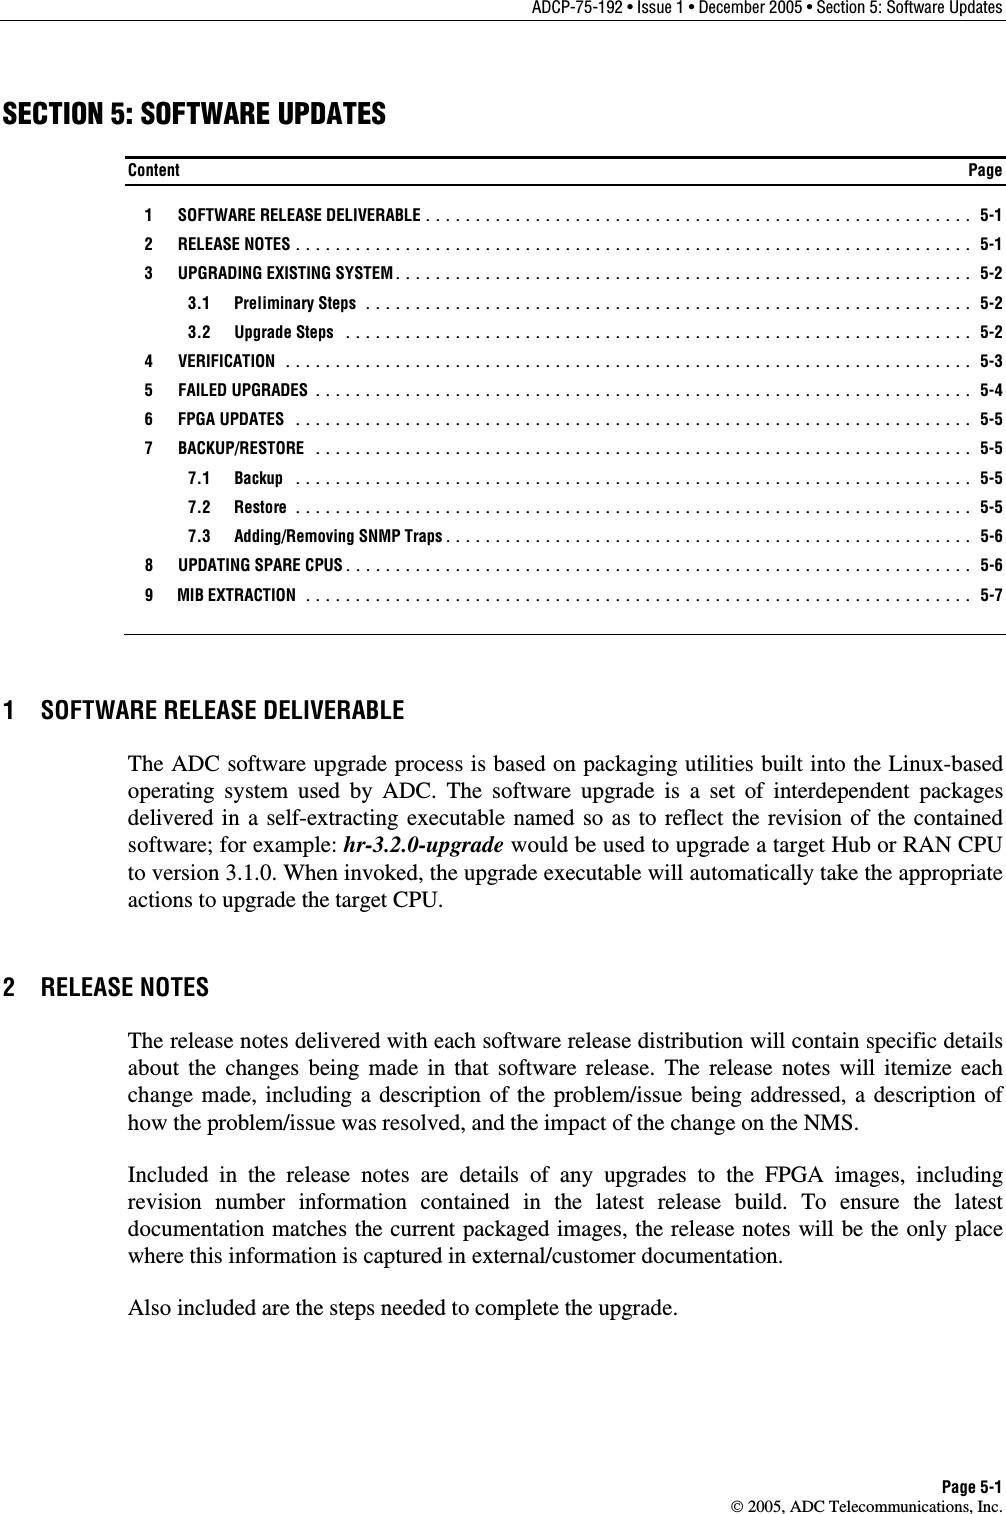 ADCP-75-192 • Issue 1 • December 2005 • Section 5: Software Updates Page 5-1  2005, ADC Telecommunications, Inc. SECTION 5: SOFTWARE UPDATES Content  Page  1  SOFTWARE RELEASE DELIVERABLE ....................................................... 5-1  2  RELEASE NOTES .................................................................... 5-1  3  UPGRADING EXISTING SYSTEM.......................................................... 5-2  3.1 Preliminary Steps ............................................................. 5-2  3.2 Upgrade Steps ............................................................... 5-2  4  VERIFICATION ..................................................................... 5-3  5  FAILED UPGRADES .................................................................. 5-4  6  FPGA UPDATES .................................................................... 5-5  7  BACKUP/RESTORE .................................................................. 5-5  7.1 Backup .................................................................... 5-5  7.2 Restore .................................................................... 5-5  7.3 Adding/Removing SNMP Traps..................................................... 5-6   8  UPDATING SPARE CPUS............................................................... 5-6  9  MIB EXTRACTION ................................................................... 5-7 1  SOFTWARE RELEASE DELIVERABLE The ADC software upgrade process is based on packaging utilities built into the Linux-based operating system used by ADC. The software upgrade is a set of interdependent packages delivered in a self-extracting executable named so as to reflect the revision of the contained software; for example: hr-3.2.0-upgrade would be used to upgrade a target Hub or RAN CPU to version 3.1.0. When invoked, the upgrade executable will automatically take the appropriate actions to upgrade the target CPU.  2 RELEASE NOTES The release notes delivered with each software release distribution will contain specific details about the changes being made in that software release. The release notes will itemize each change made, including a description of the problem/issue being addressed, a description of how the problem/issue was resolved, and the impact of the change on the NMS.  Included in the release notes are details of any upgrades to the FPGA images, including revision number information contained in the latest release build. To ensure the latest documentation matches the current packaged images, the release notes will be the only place where this information is captured in external/customer documentation.  Also included are the steps needed to complete the upgrade. 